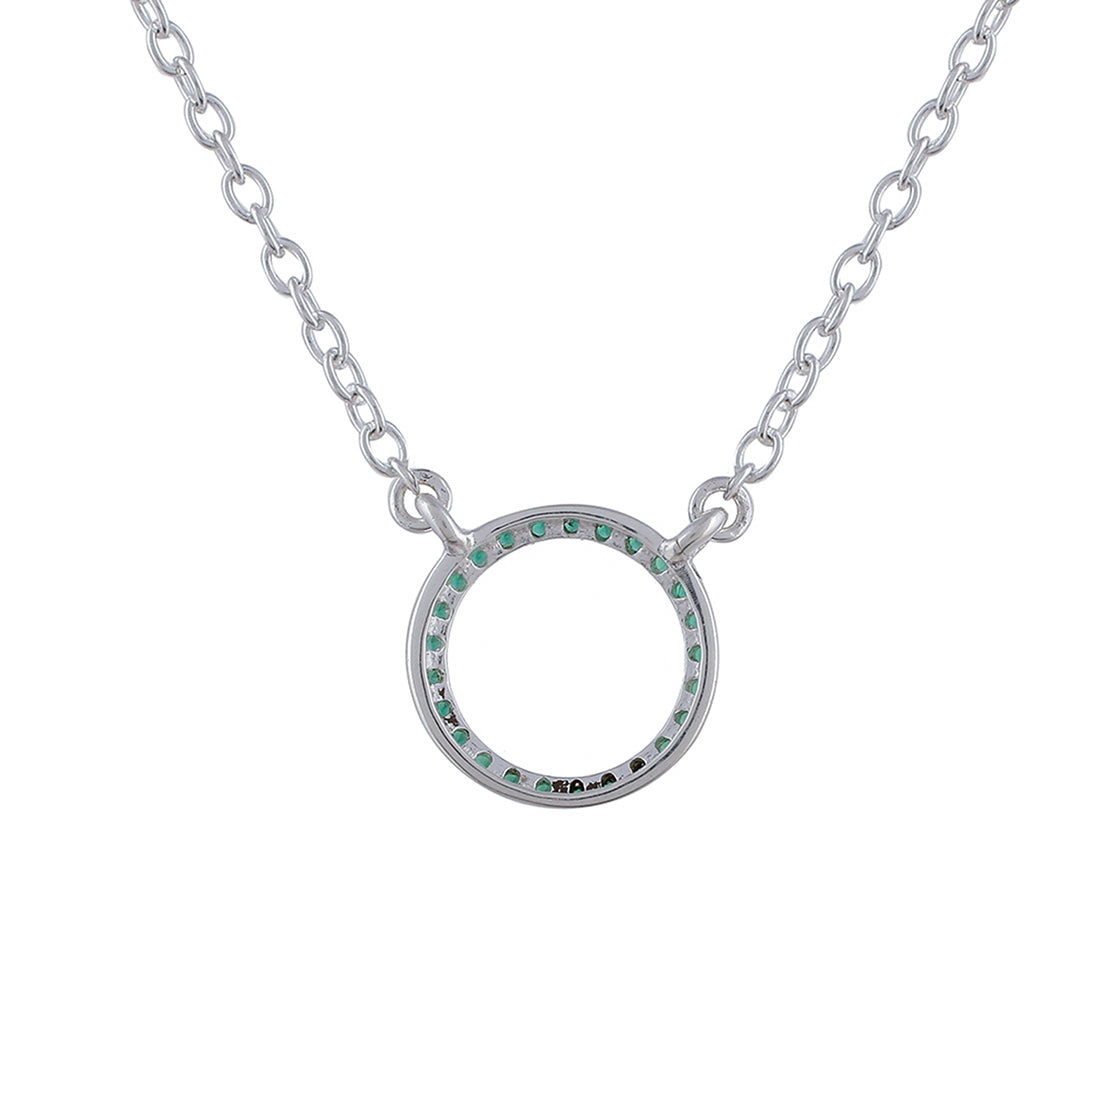 Stunning Round 925 Sterling Silver Necklace with Green CZ